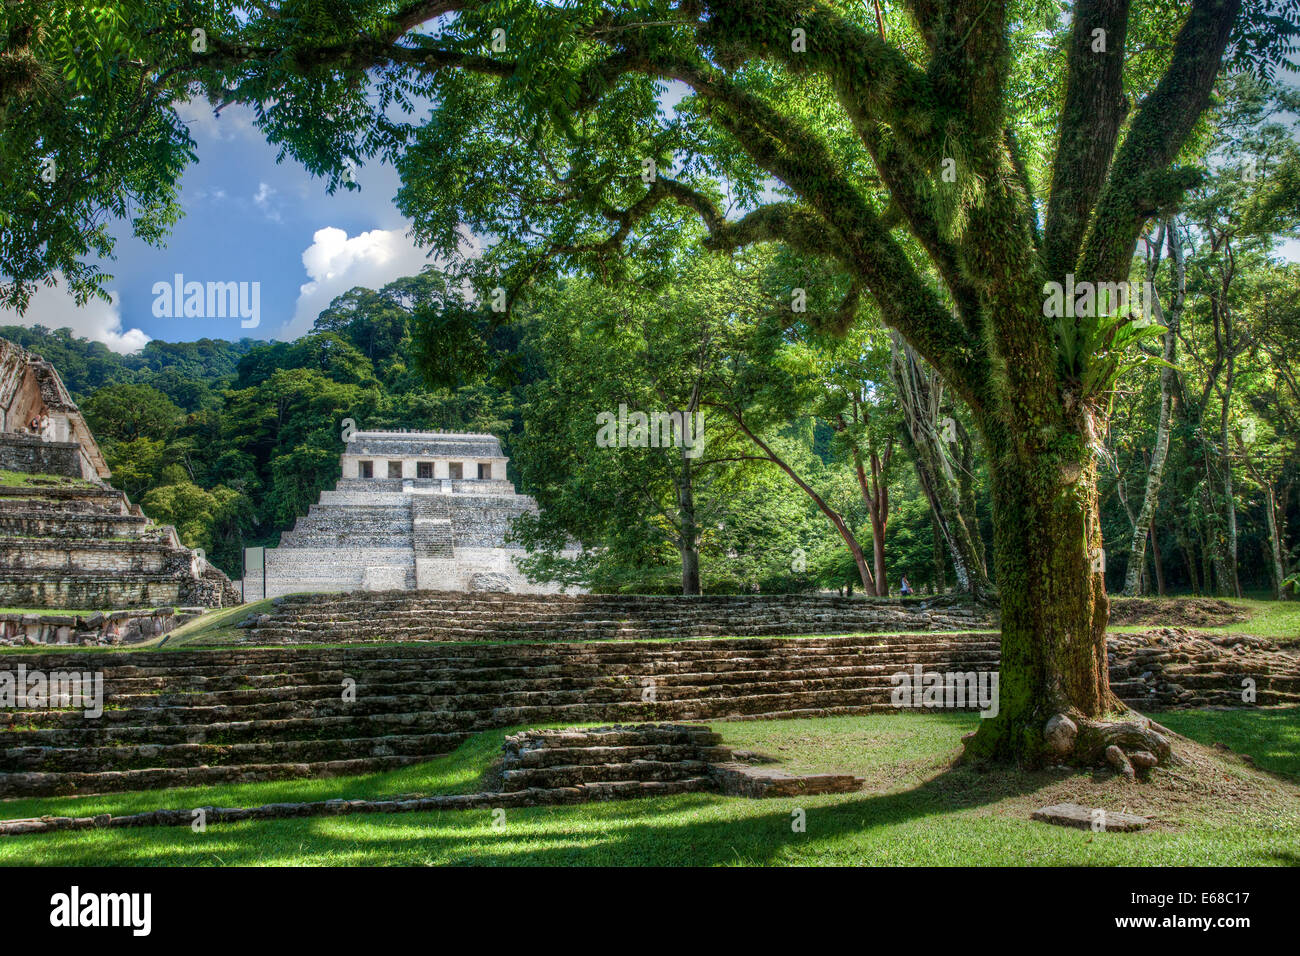 Temple of the Inscriptions shines like a white pearl in the jungle at the Mayan ruins of Palenque, Chiapas, Mexico. Stock Photo